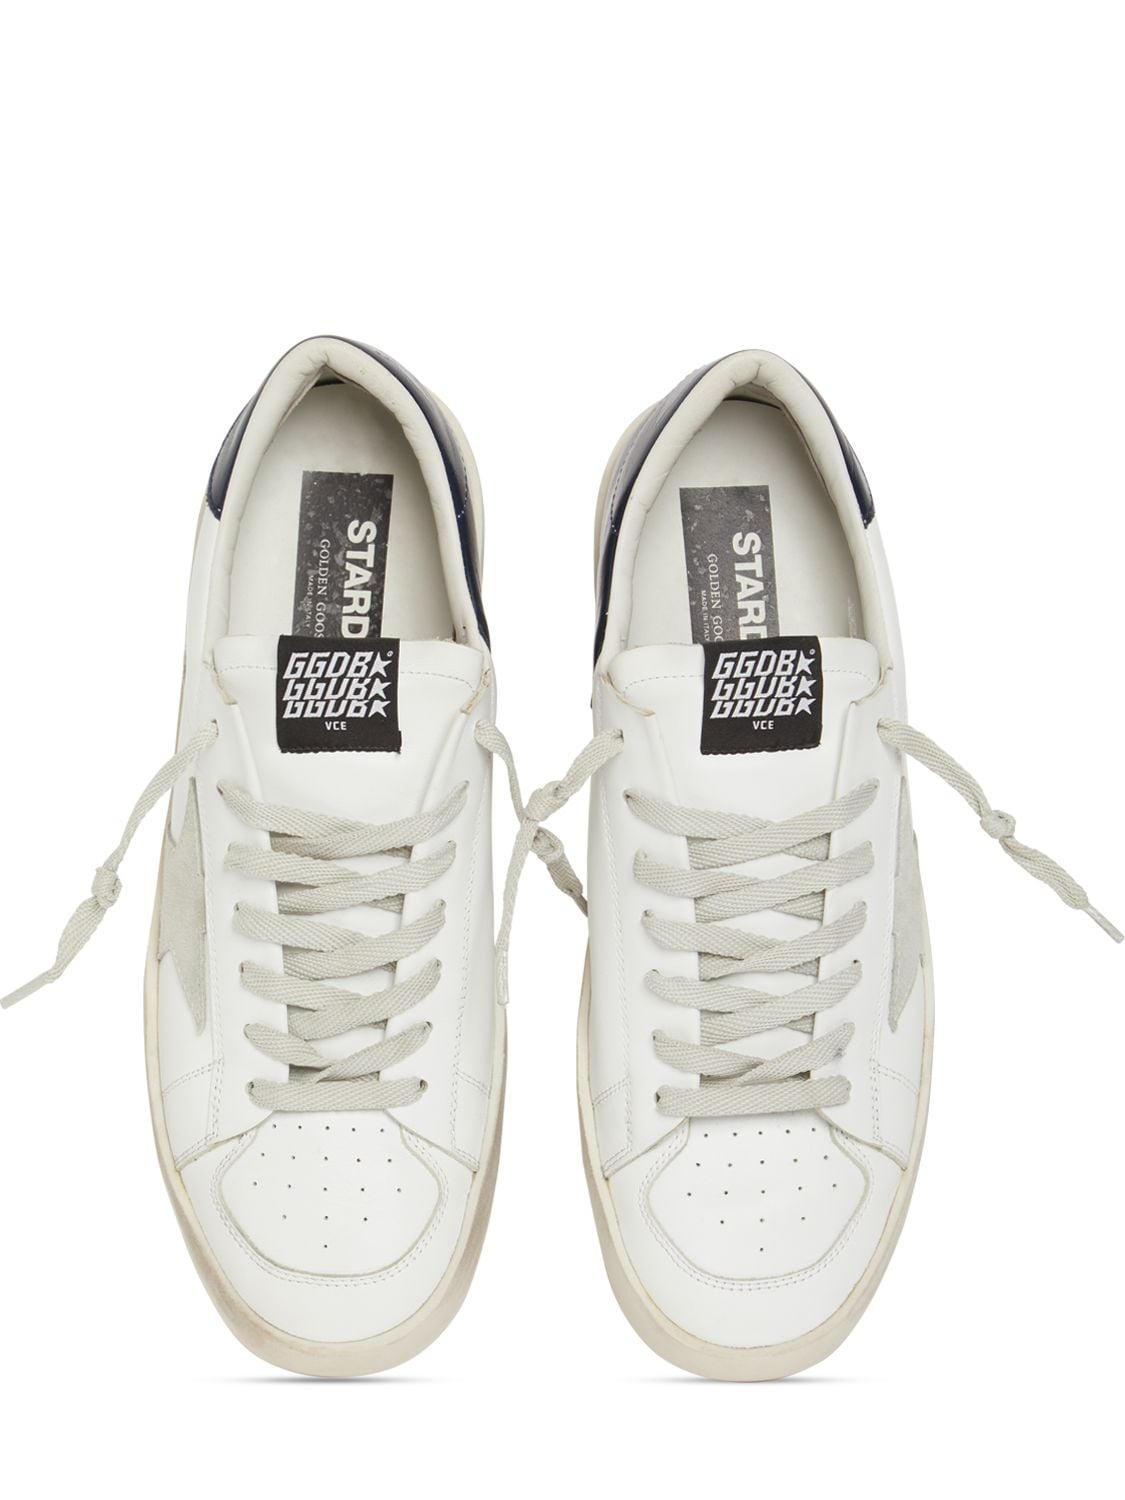 Shop Golden Goose Stardan Leather & Suede Sneakers In White,black